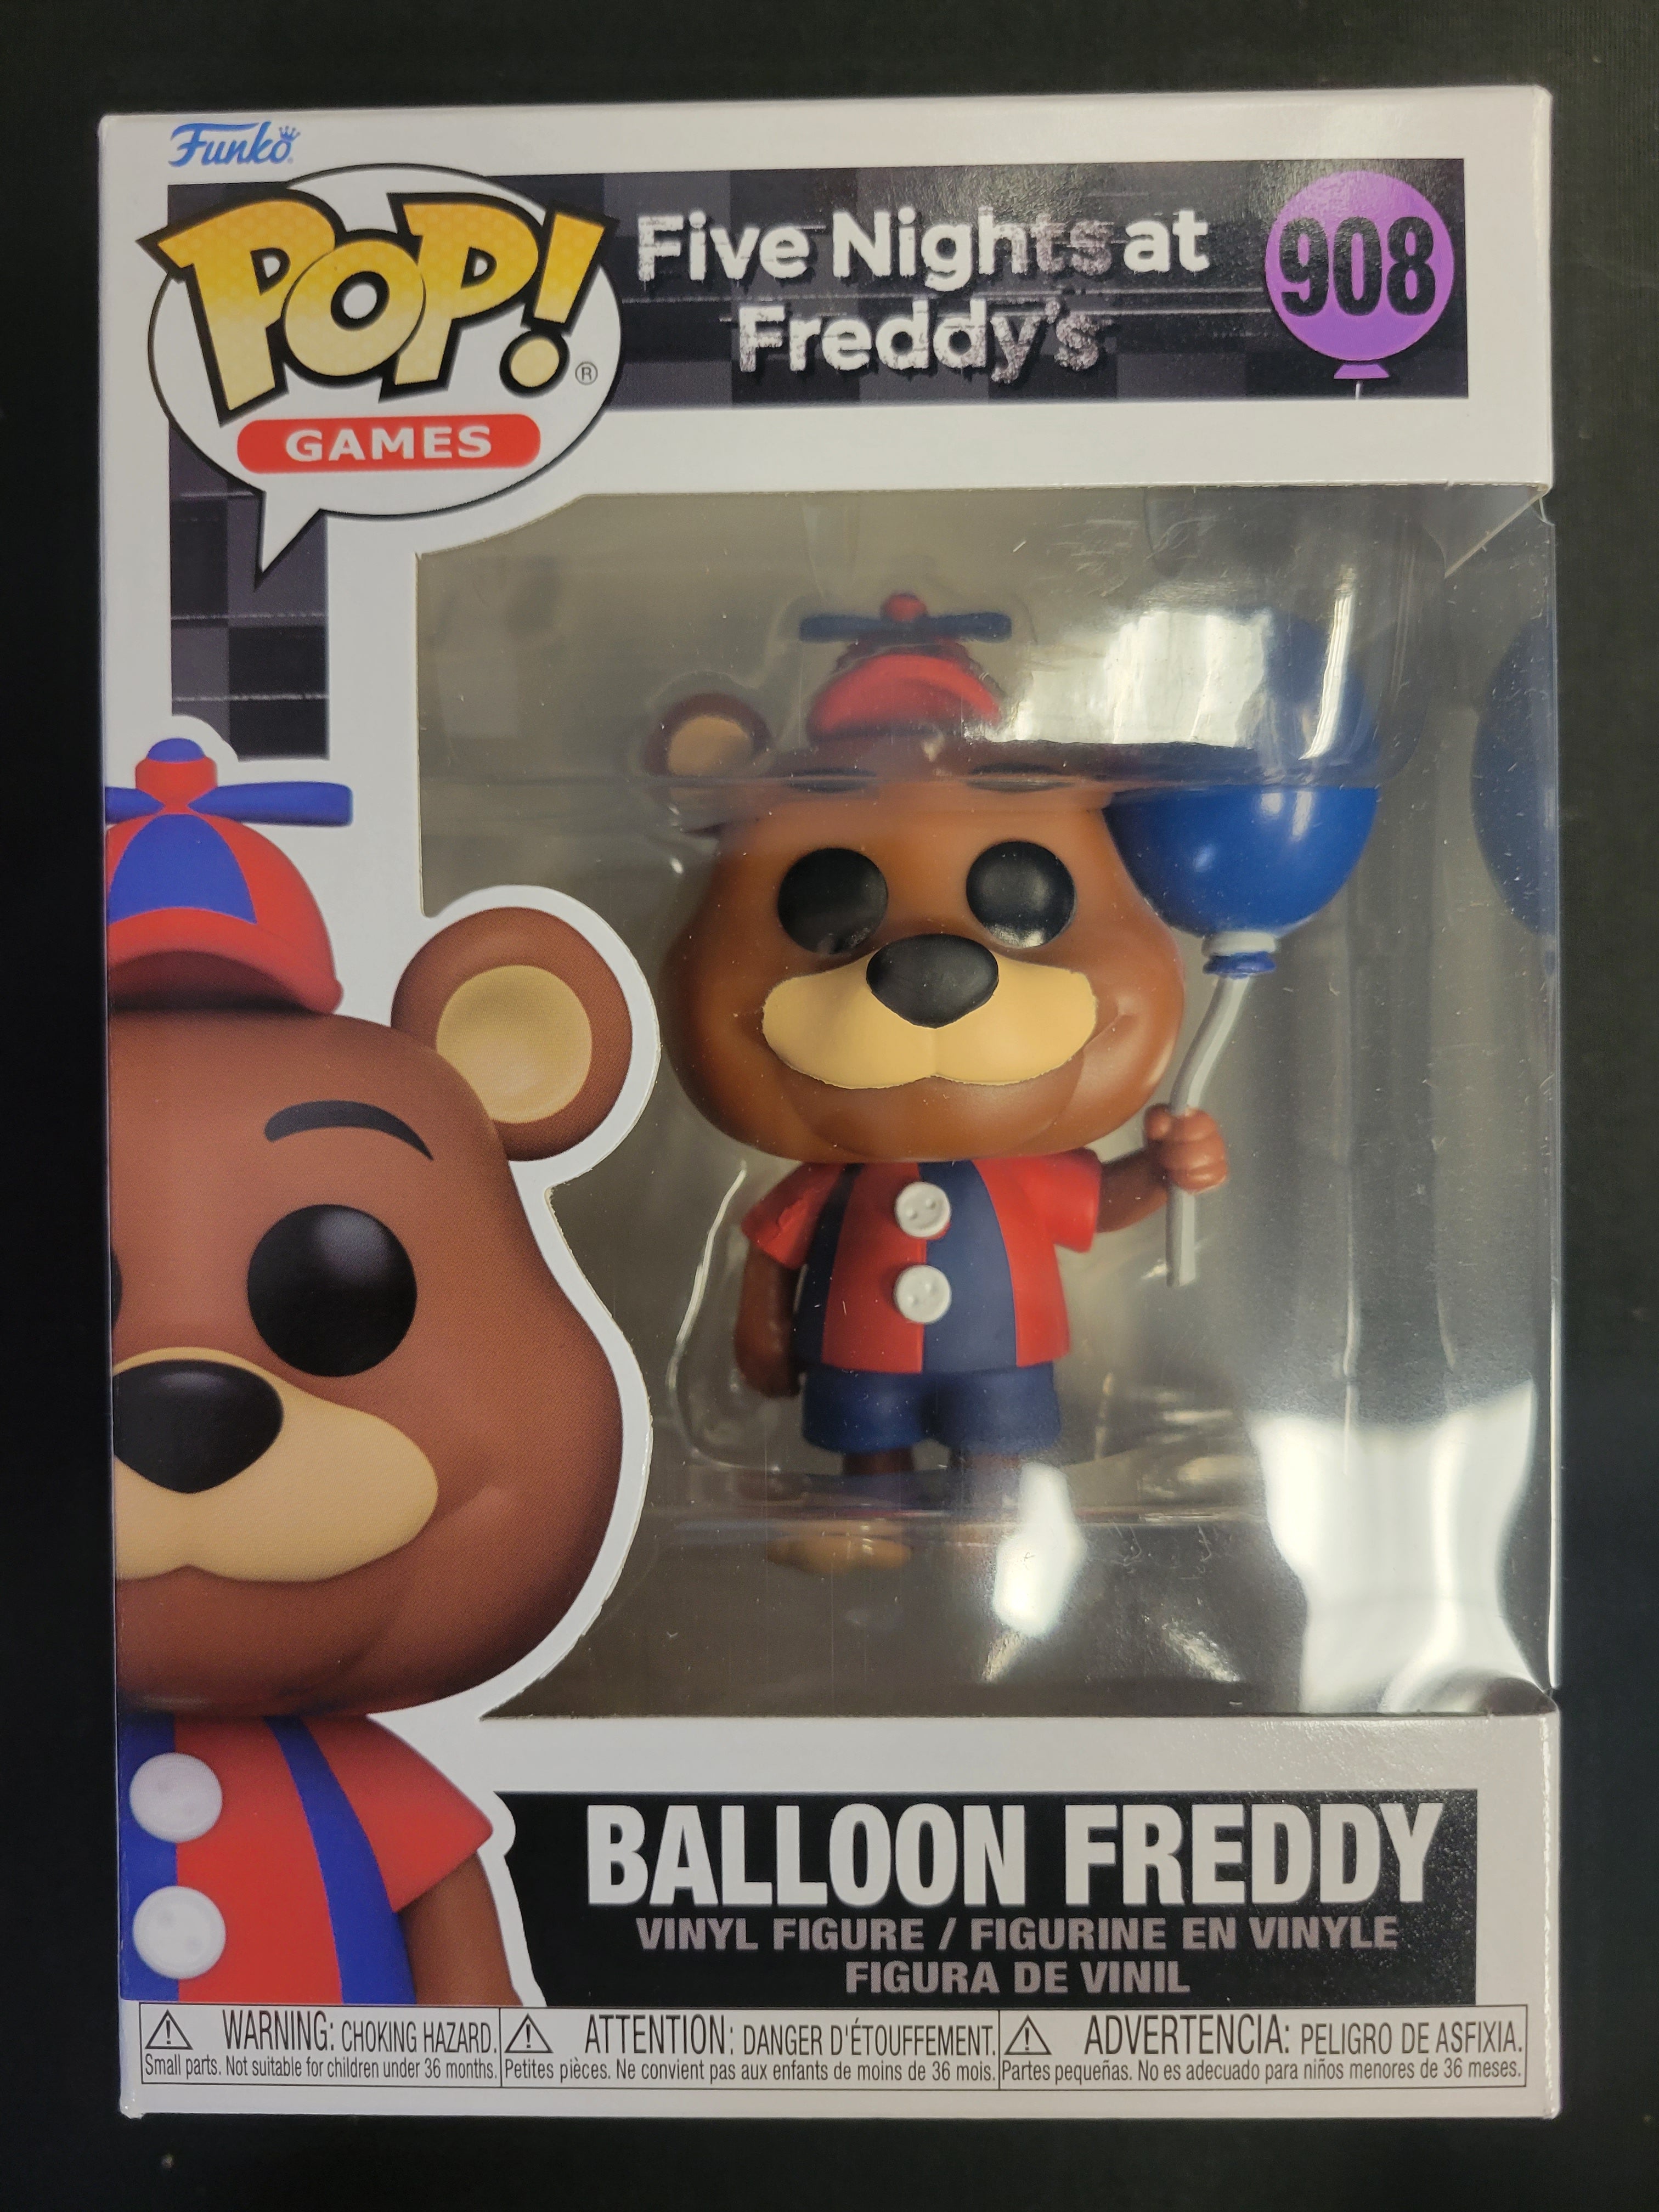 Funko Pop! Five Nights at Freddy's Circus Full Set - On Hand and